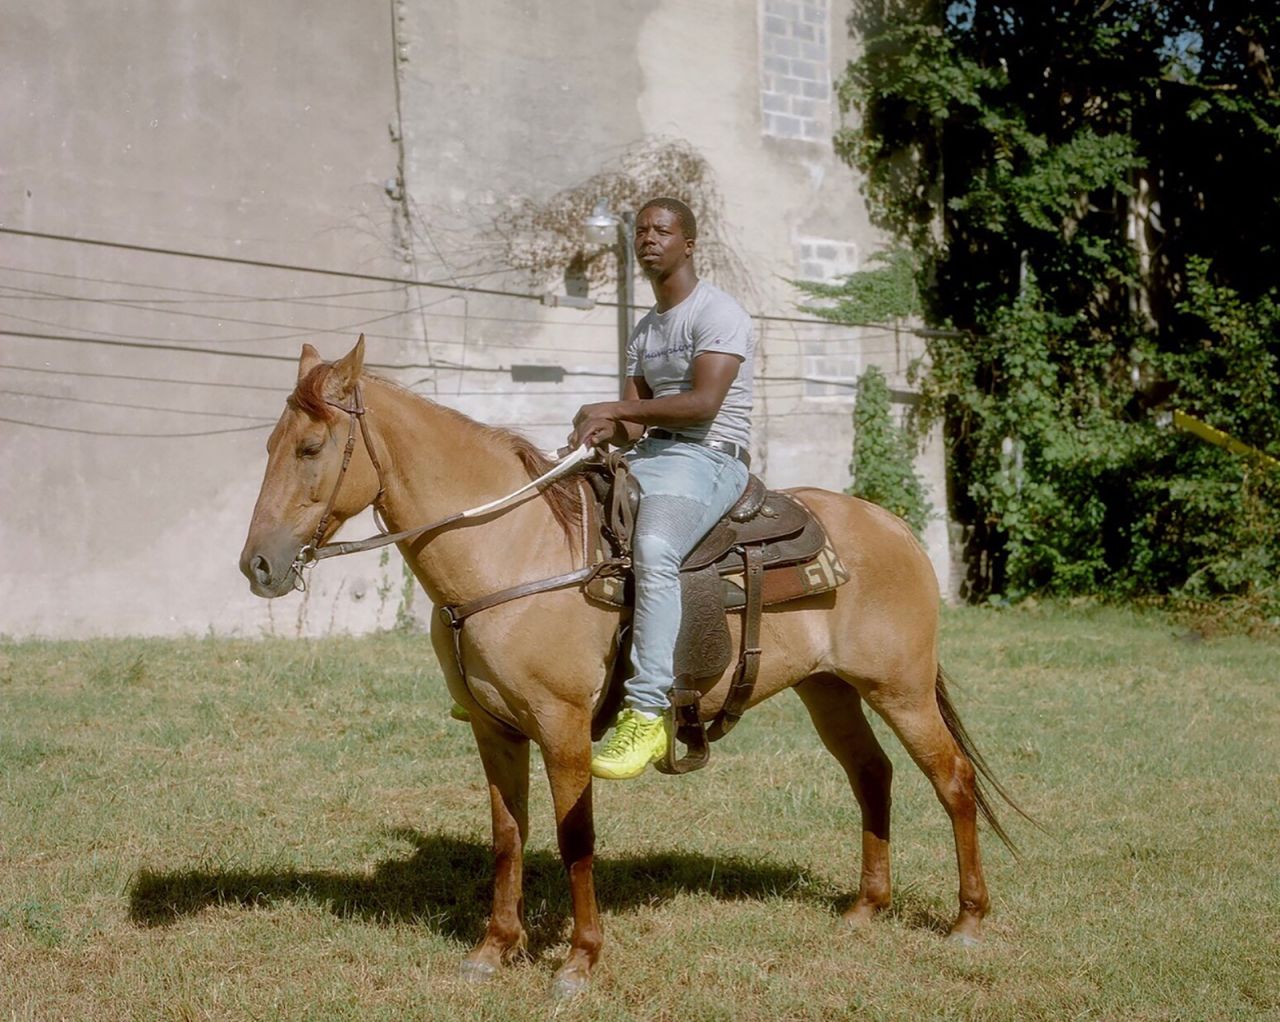 "There's just something larger than life about riding horses," said Carter.